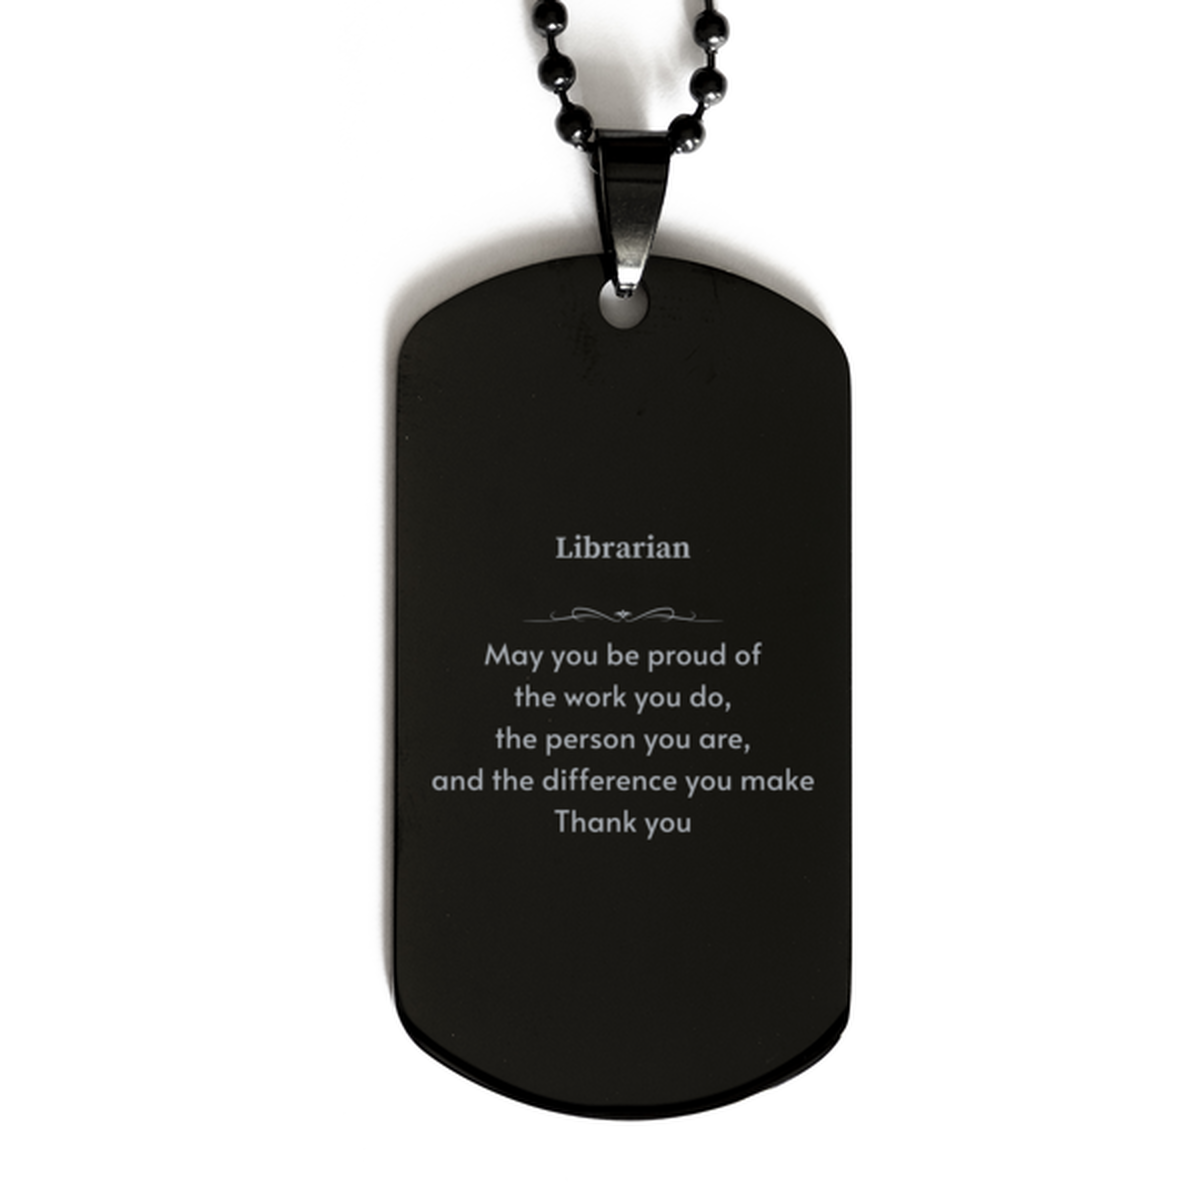 Heartwarming Black Dog Tag Retirement Coworkers Gifts for Librarian, Librarian May You be proud of the work you do, the person you are Gifts for Boss Men Women Friends